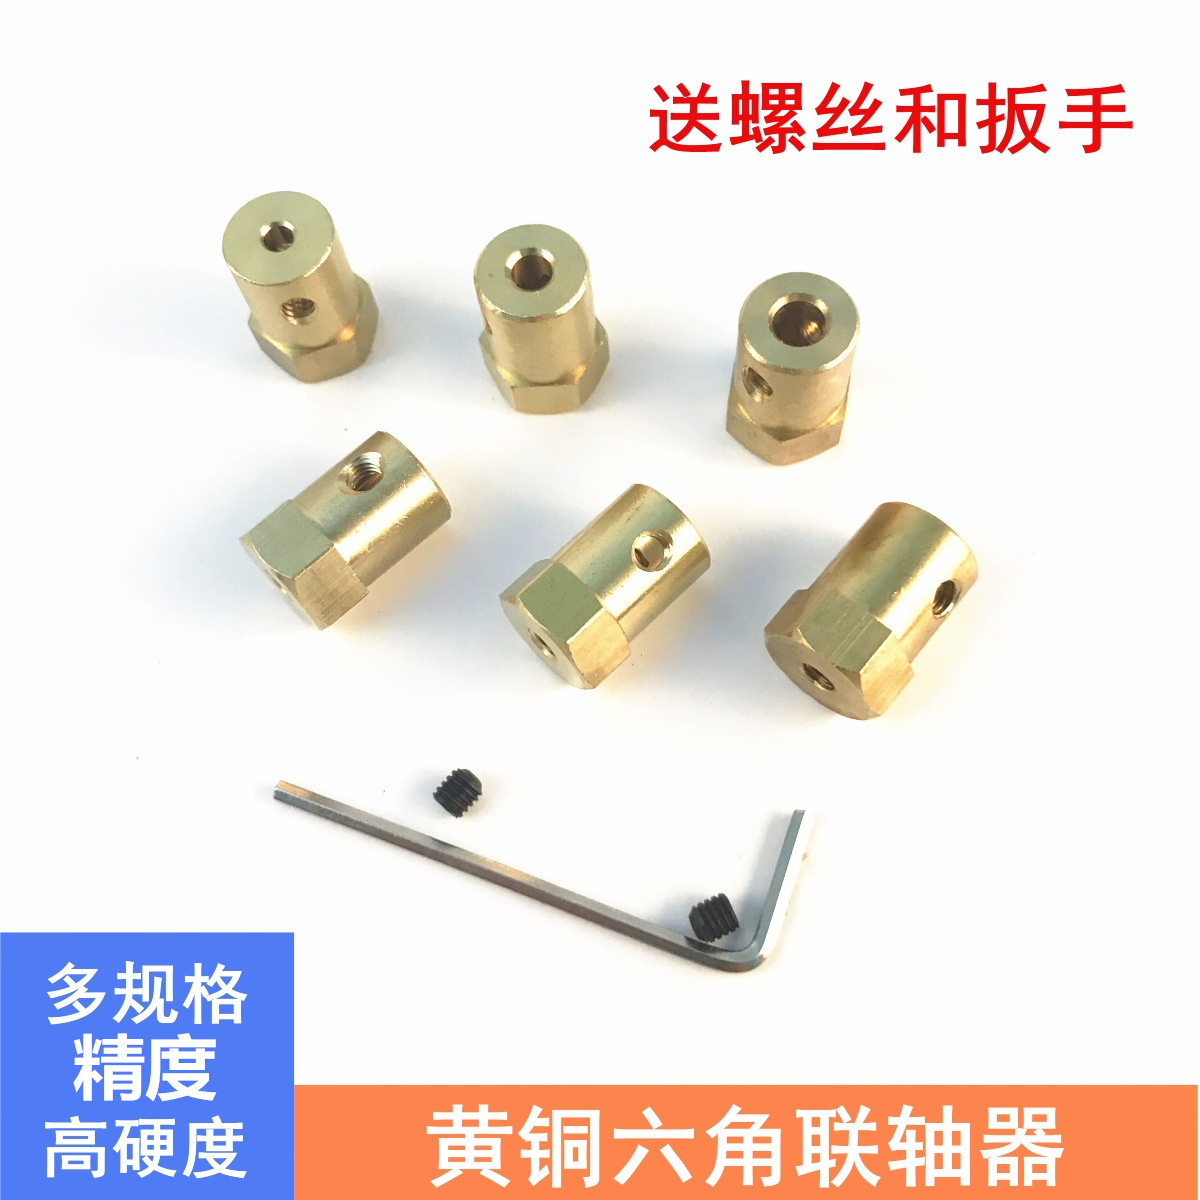 Brass hexagonal couplings trolley tires connector couplings 2 3 4 5 6 7 8mm Model accessories